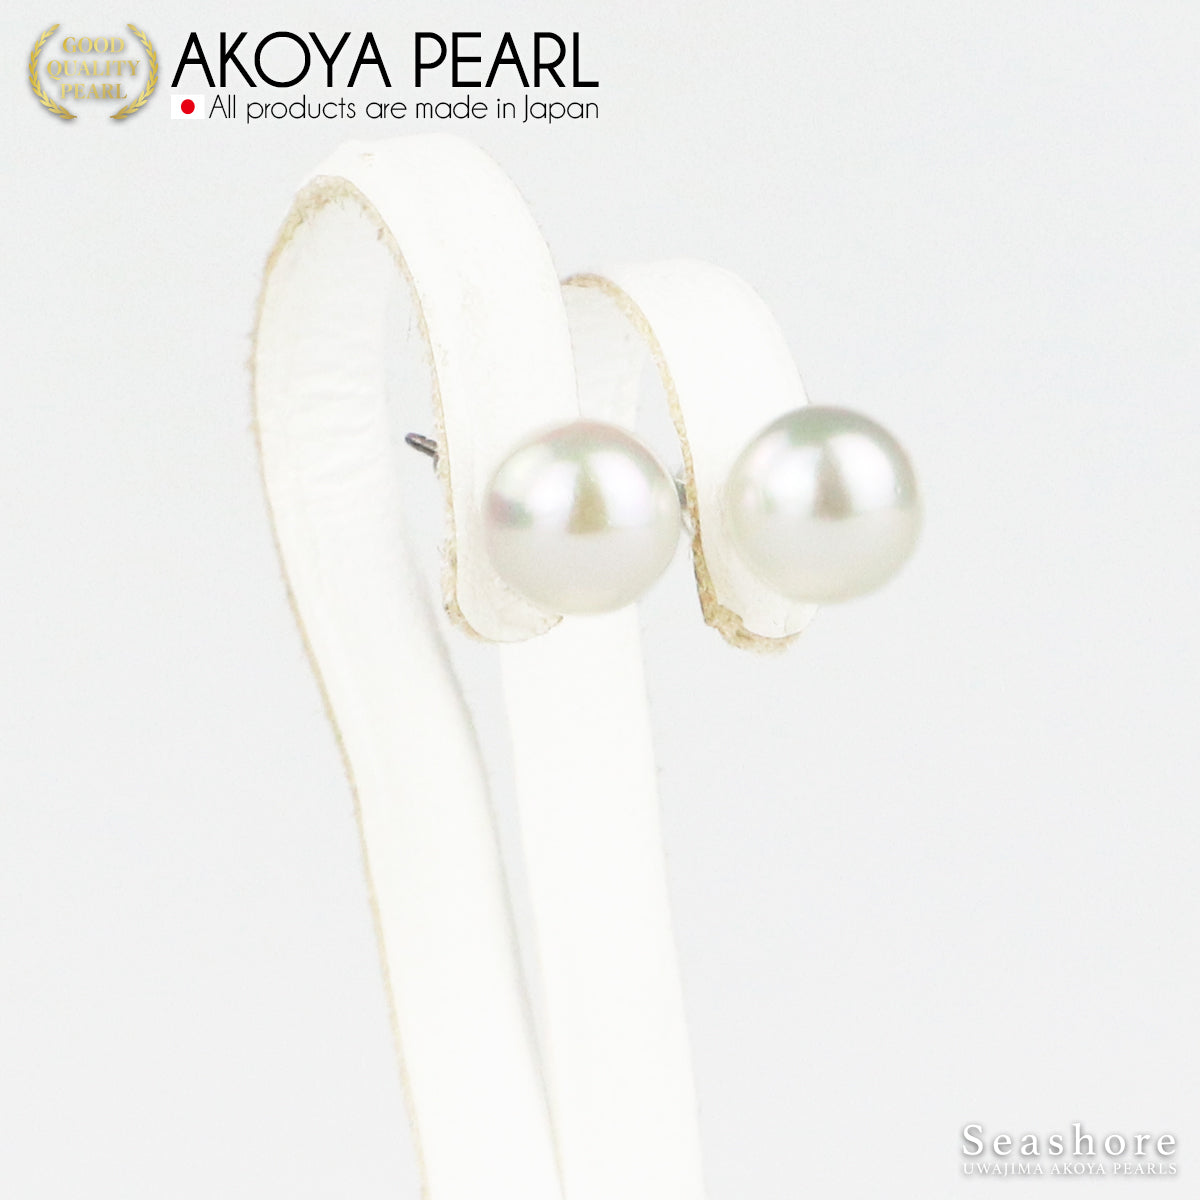 Pearl stud earrings [8.0-8.5mm] Free gift included SV925 Titanium Akoya Akoya Pearl Simple Direct Connection